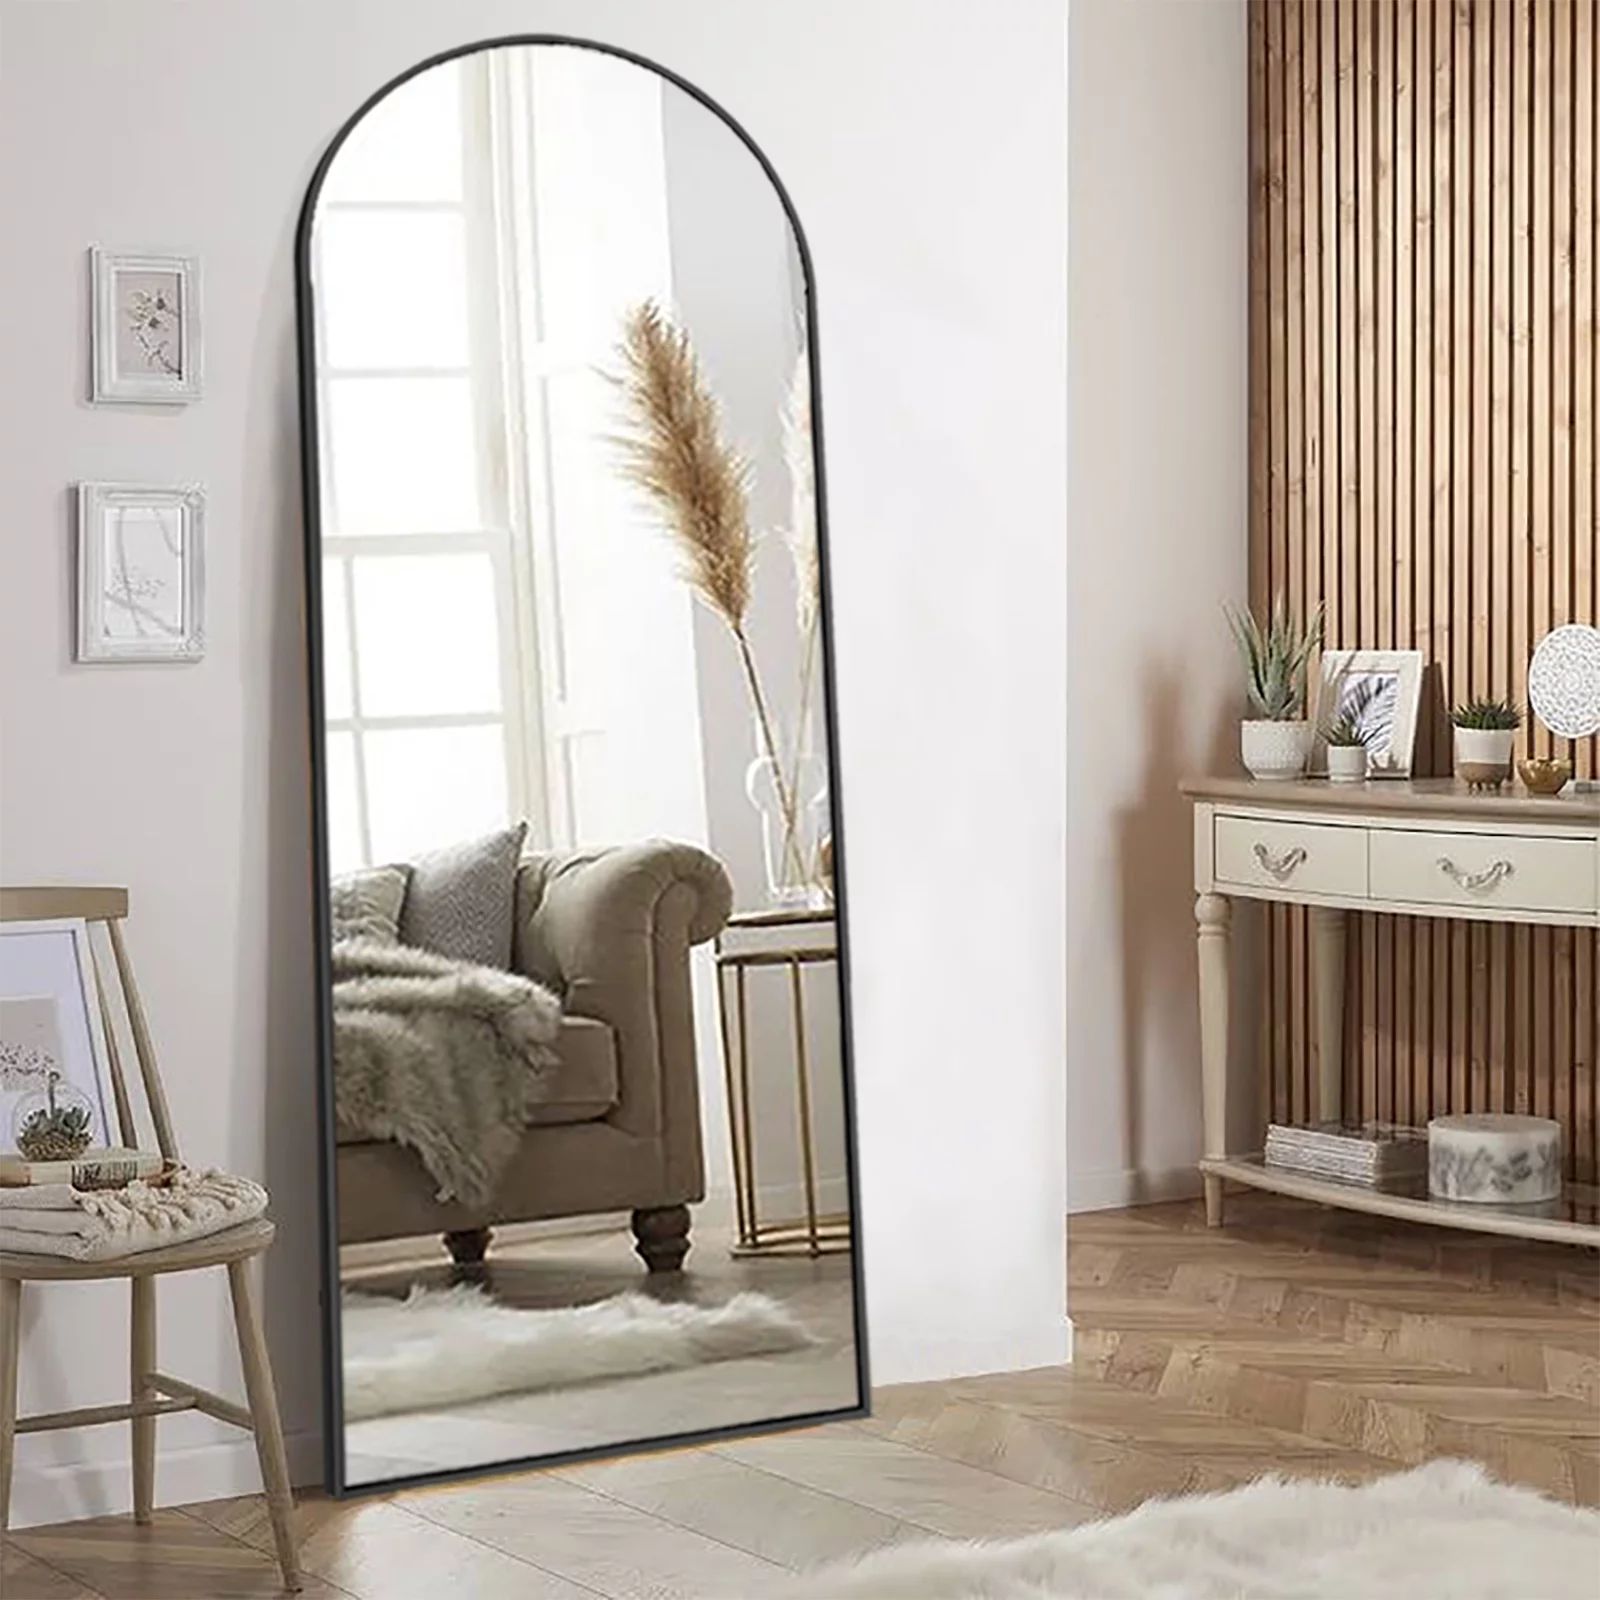 Vlush Full Length Mirror, 65"x22" Arched Floor Mirror, Full Body Mirror, Freestanding Arched-Top ... | Walmart (US)